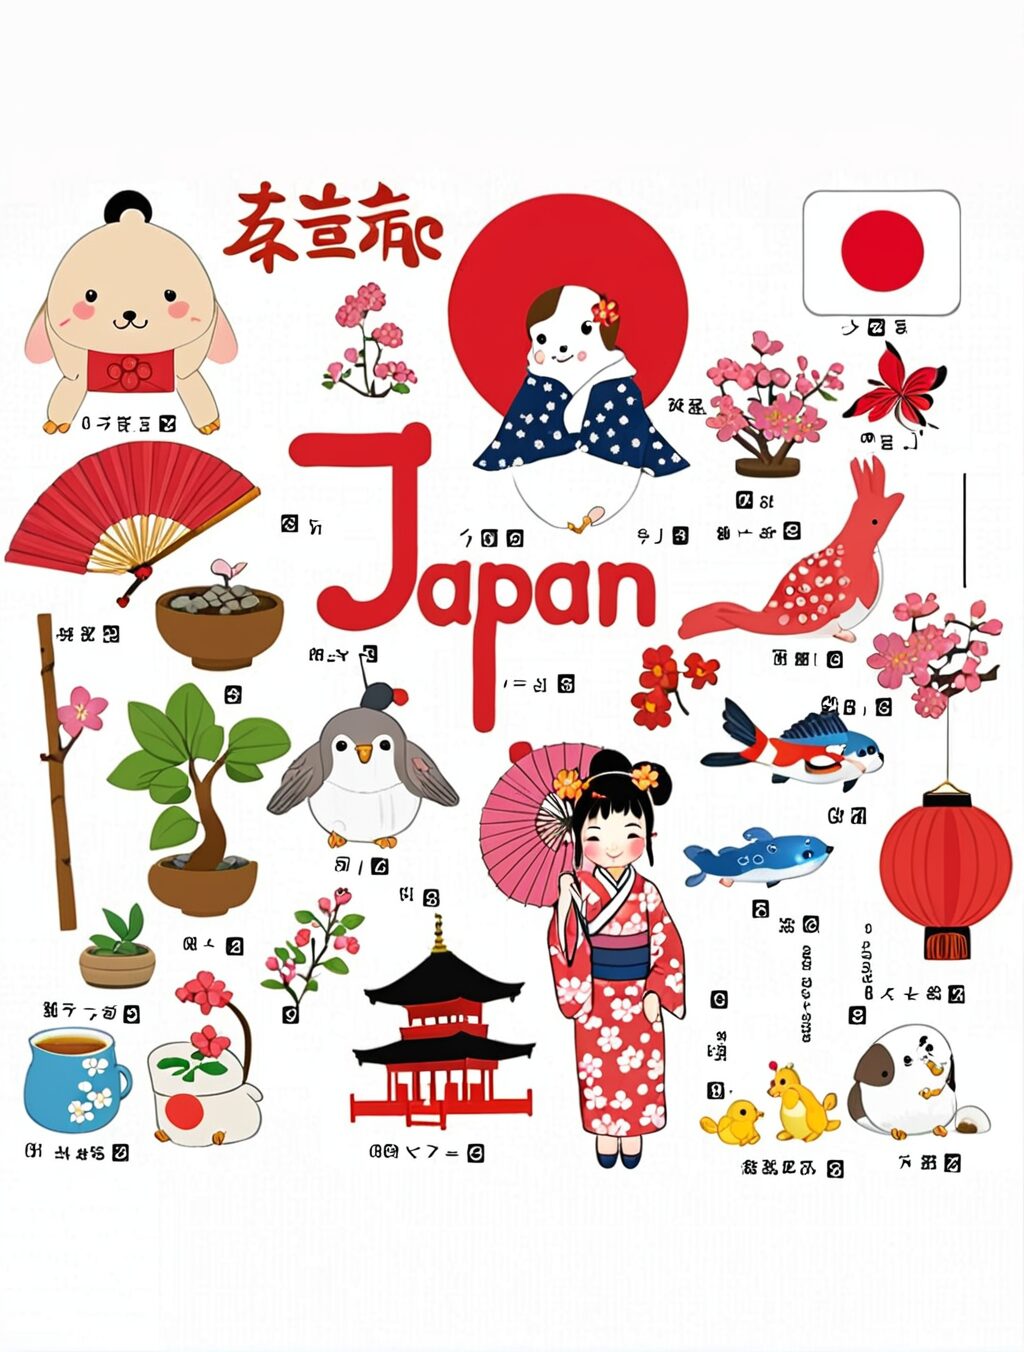 culture of cuteness in japan crossword puzzle clue